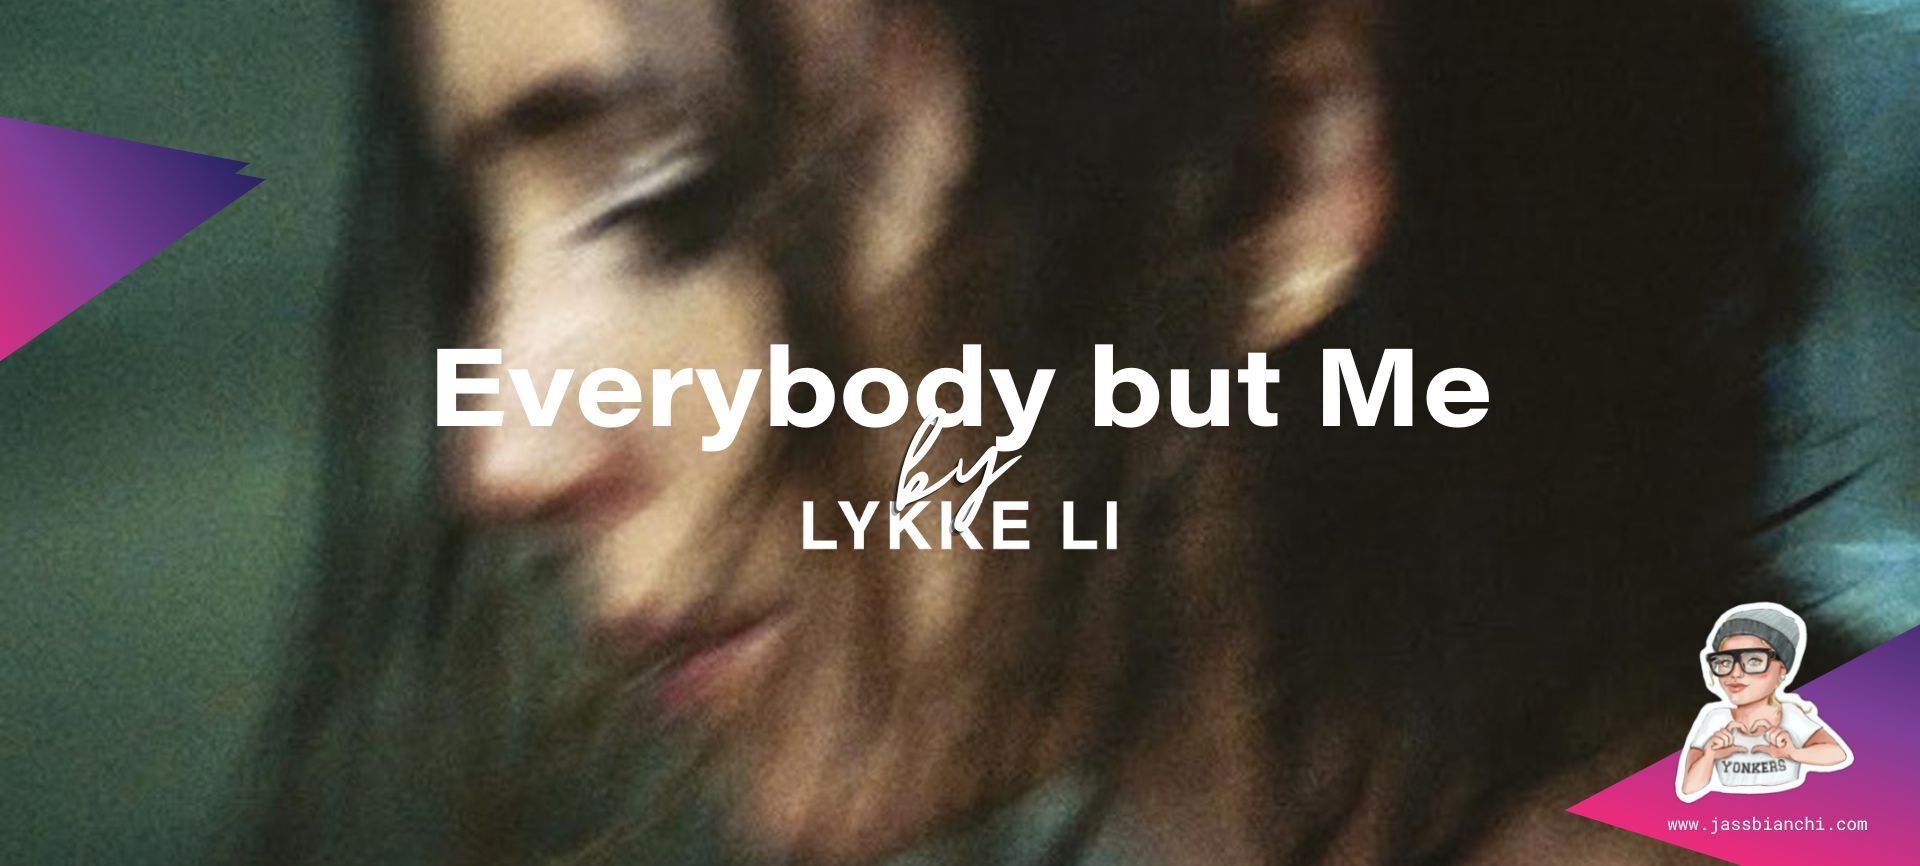 Everybody but Me by Lykke Li Speaks to Introverts Everywhere